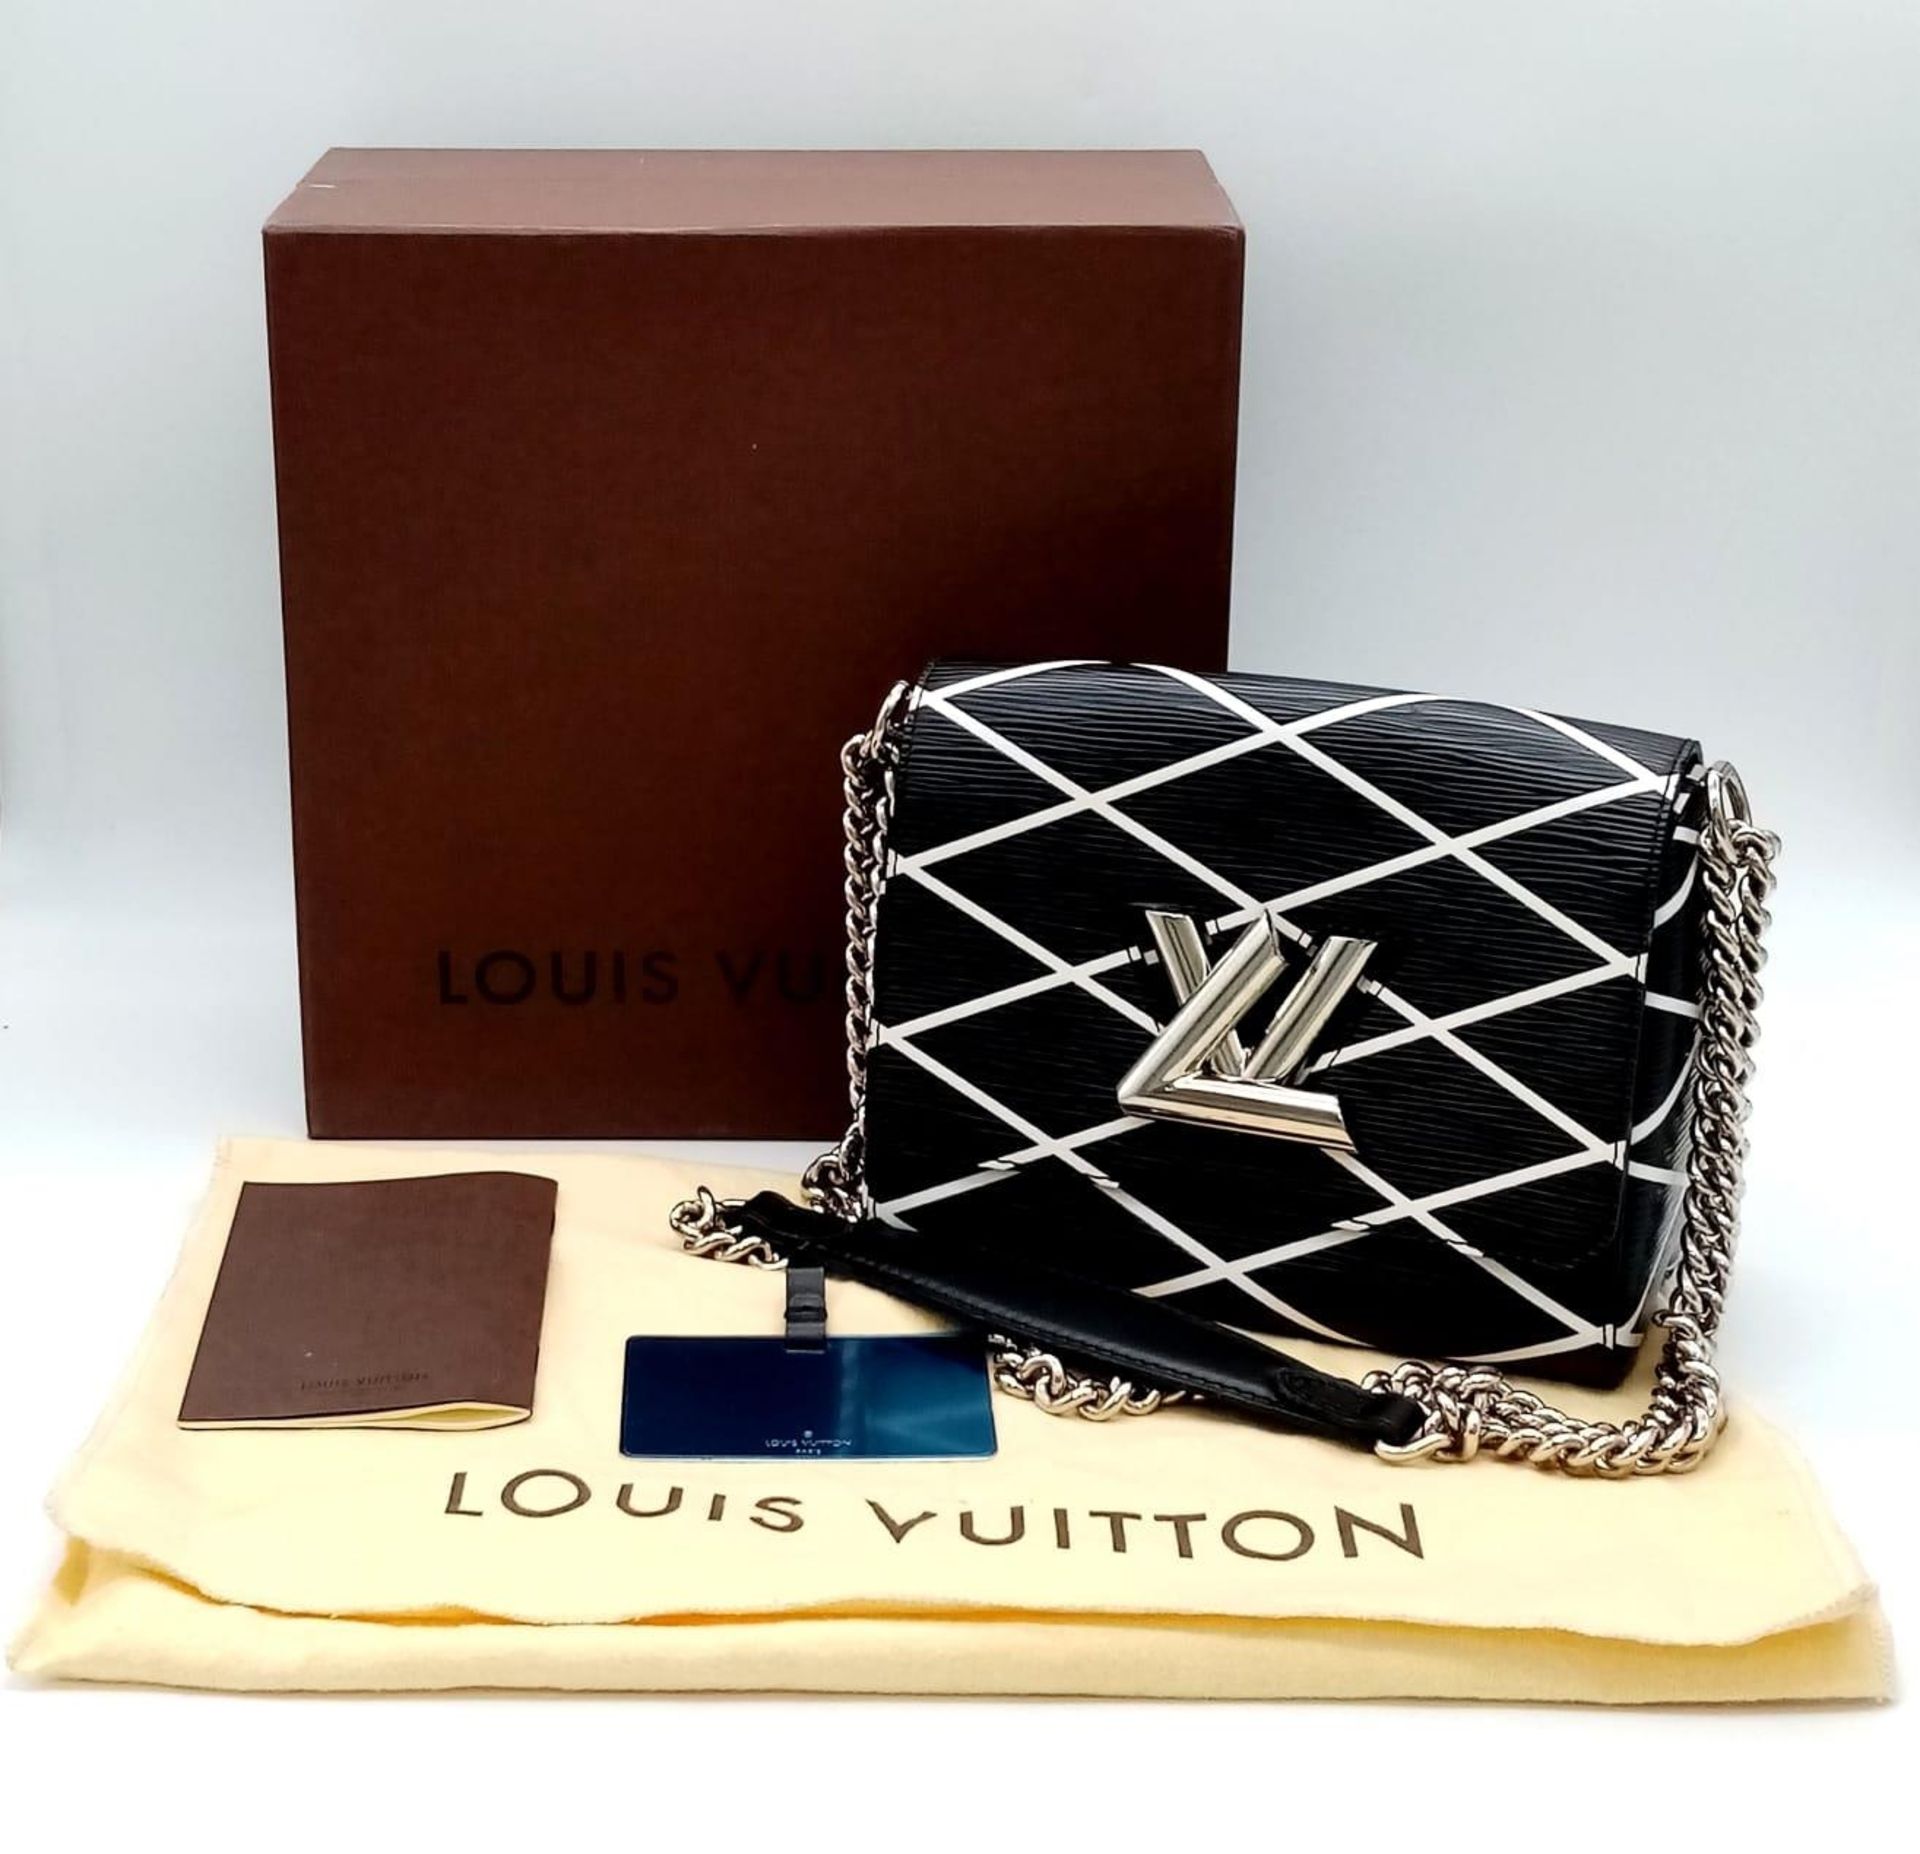 A Louis Vuitton Twist Shoulder Bag in Black Epi Leather with White Diamond Pattern, Silver Coloured - Image 9 of 9